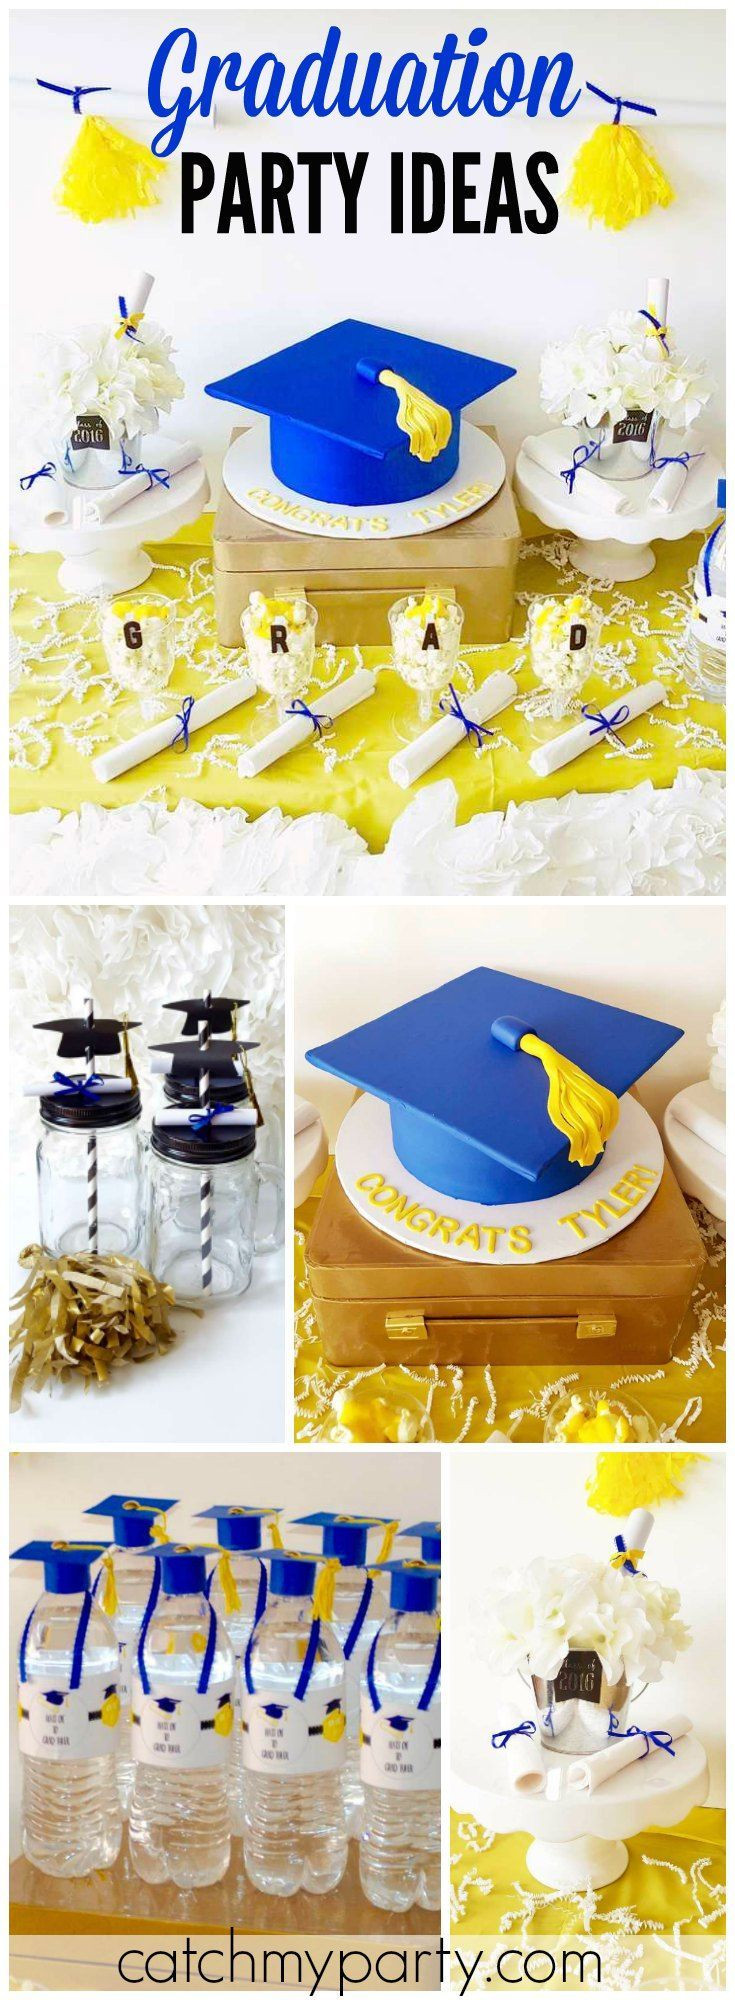 Blue And Yellow Graduation Party Ideas
 Hats f Grad Graduation End of School "Graduation Party